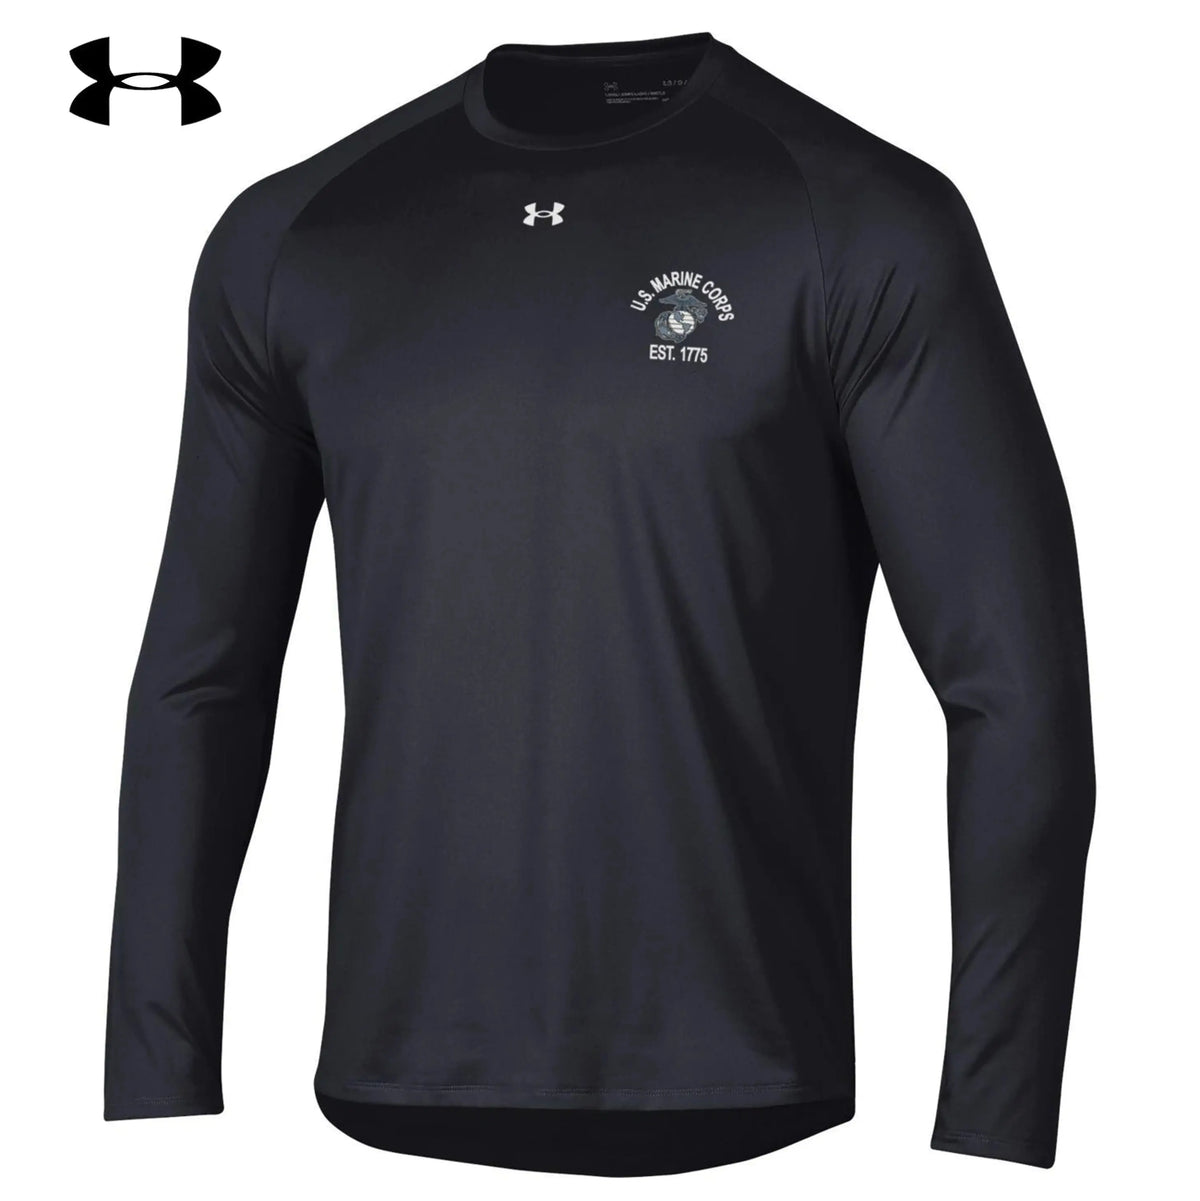 CLOSEOUT Under Armour EST. 1775 Chest Seal Tech Performance Long Sleeve Tee